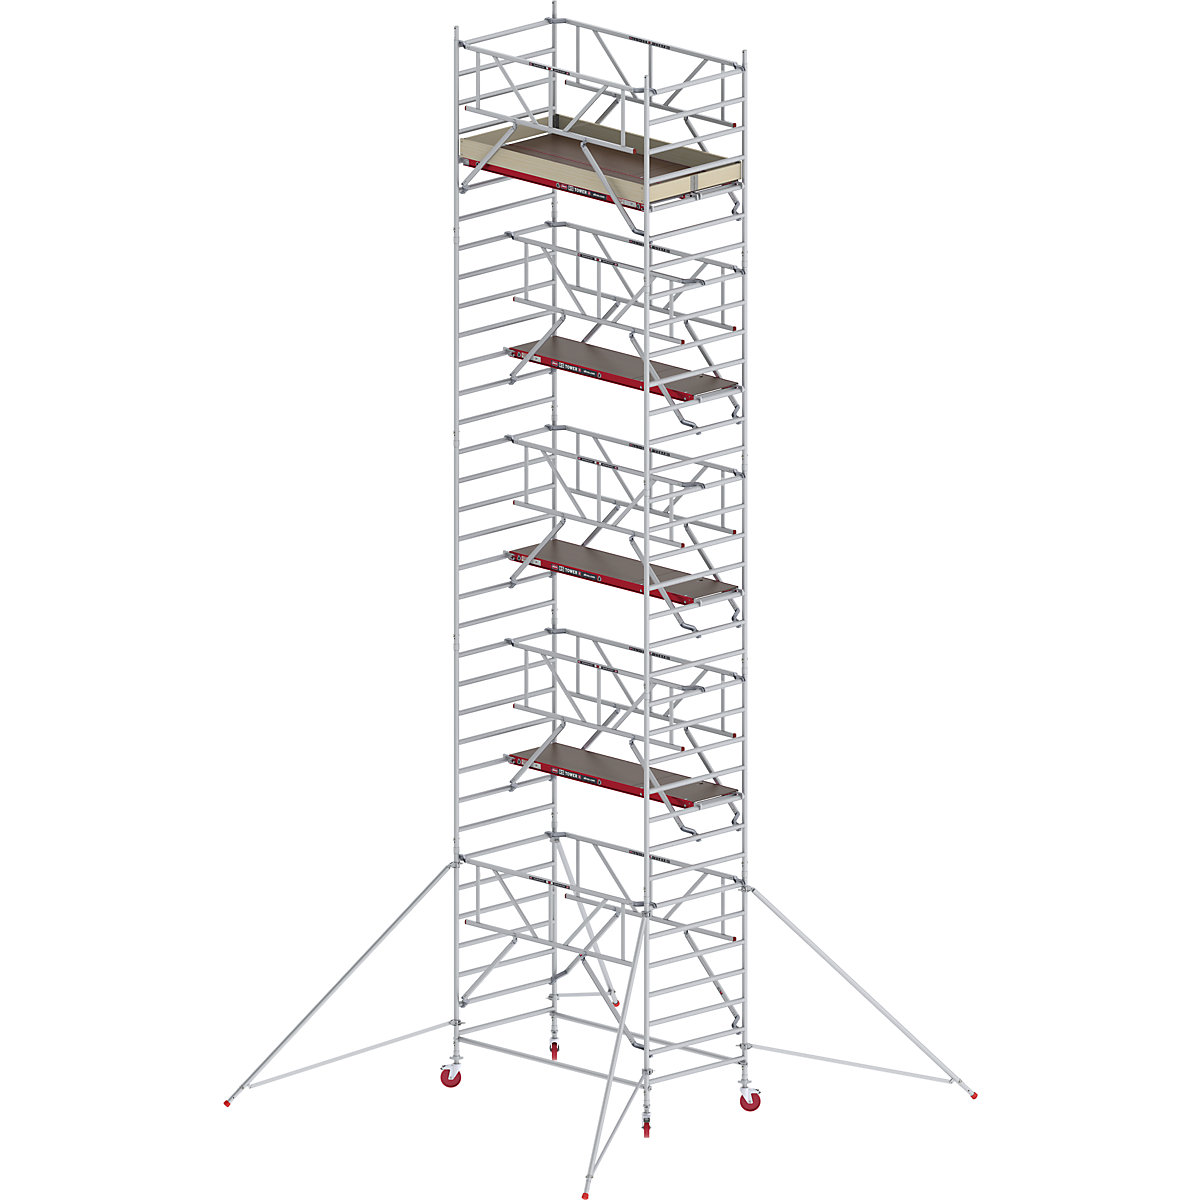 RS TOWER 42 wide mobile access tower with Safe-Quick® – Altrex, wooden platform, length 2.45 m, working height 11.20 m-7